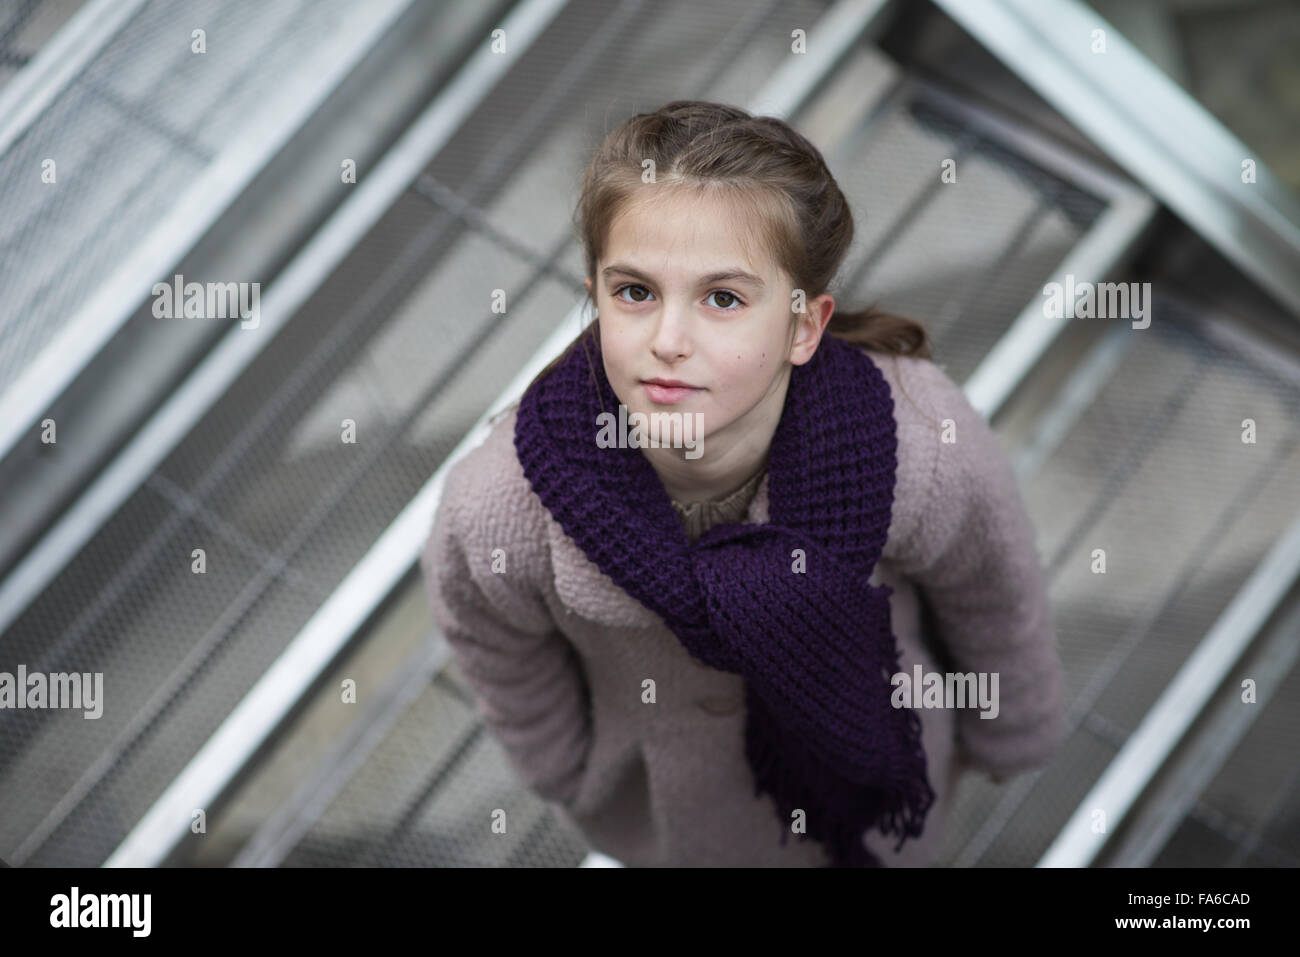 Elevated view of a girl looking up Stock Photo